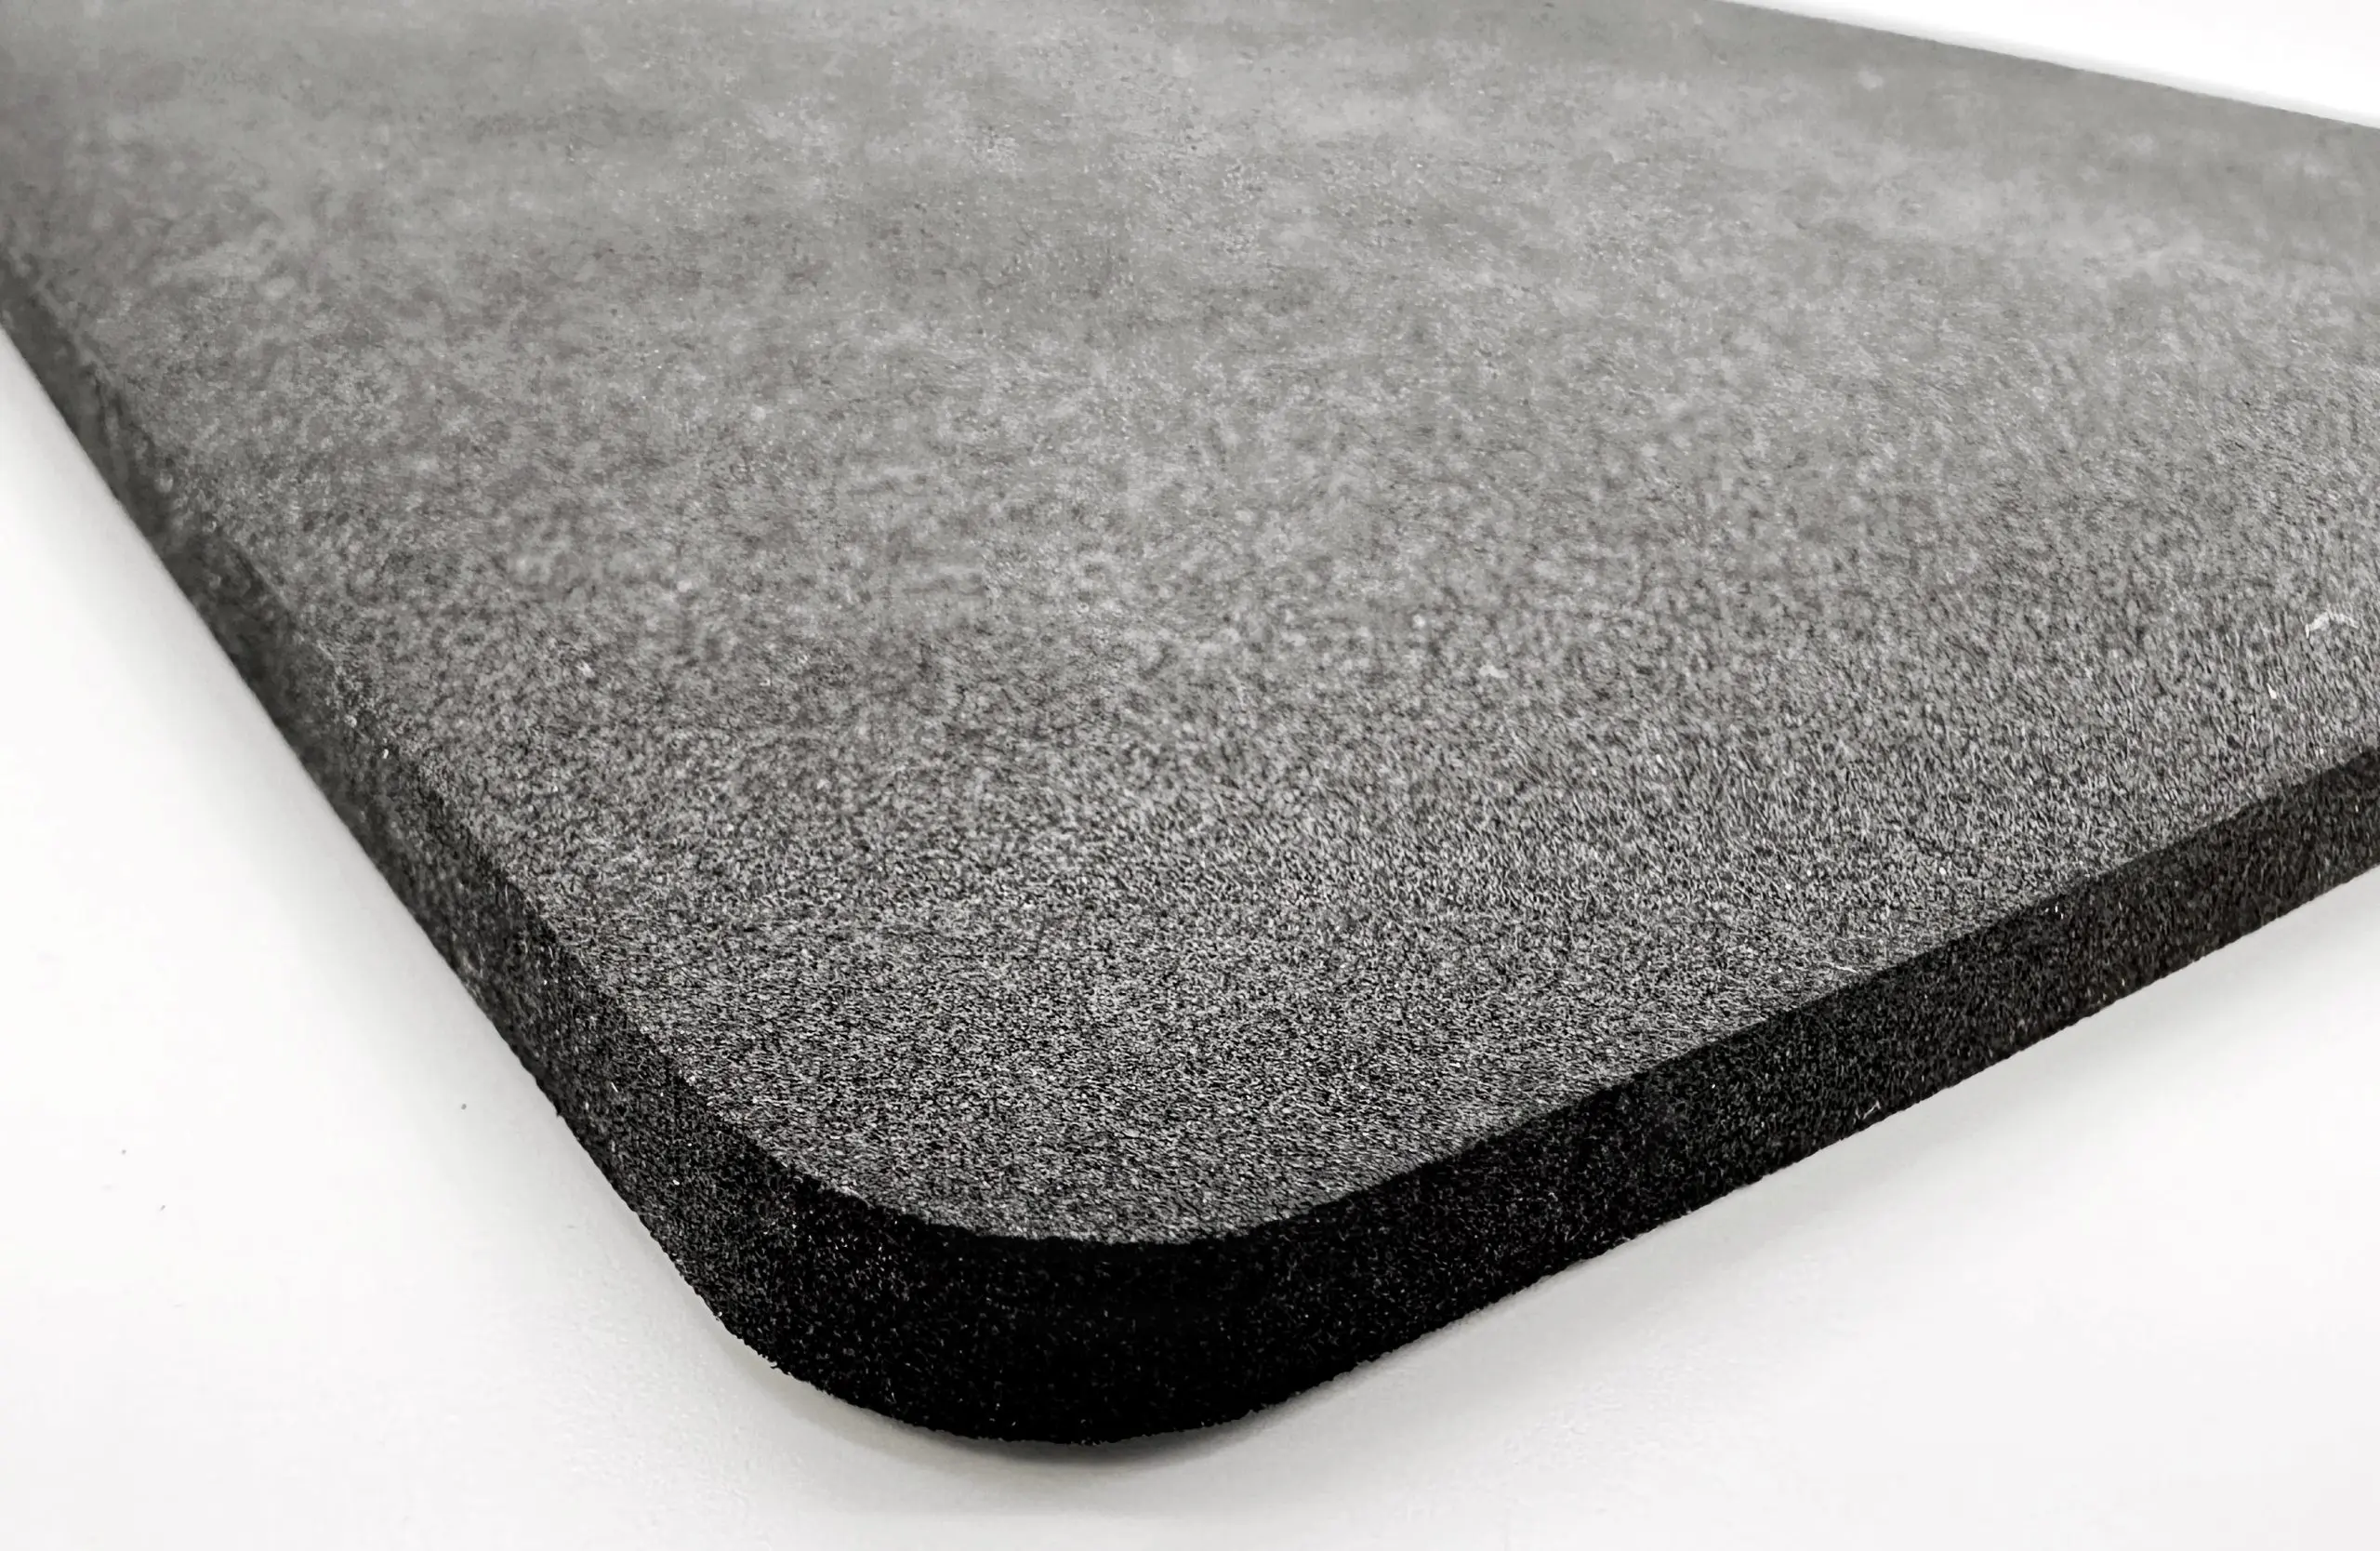 Closed Cell Sponge Rubber sample block, more commonly known as Neoprene Foam